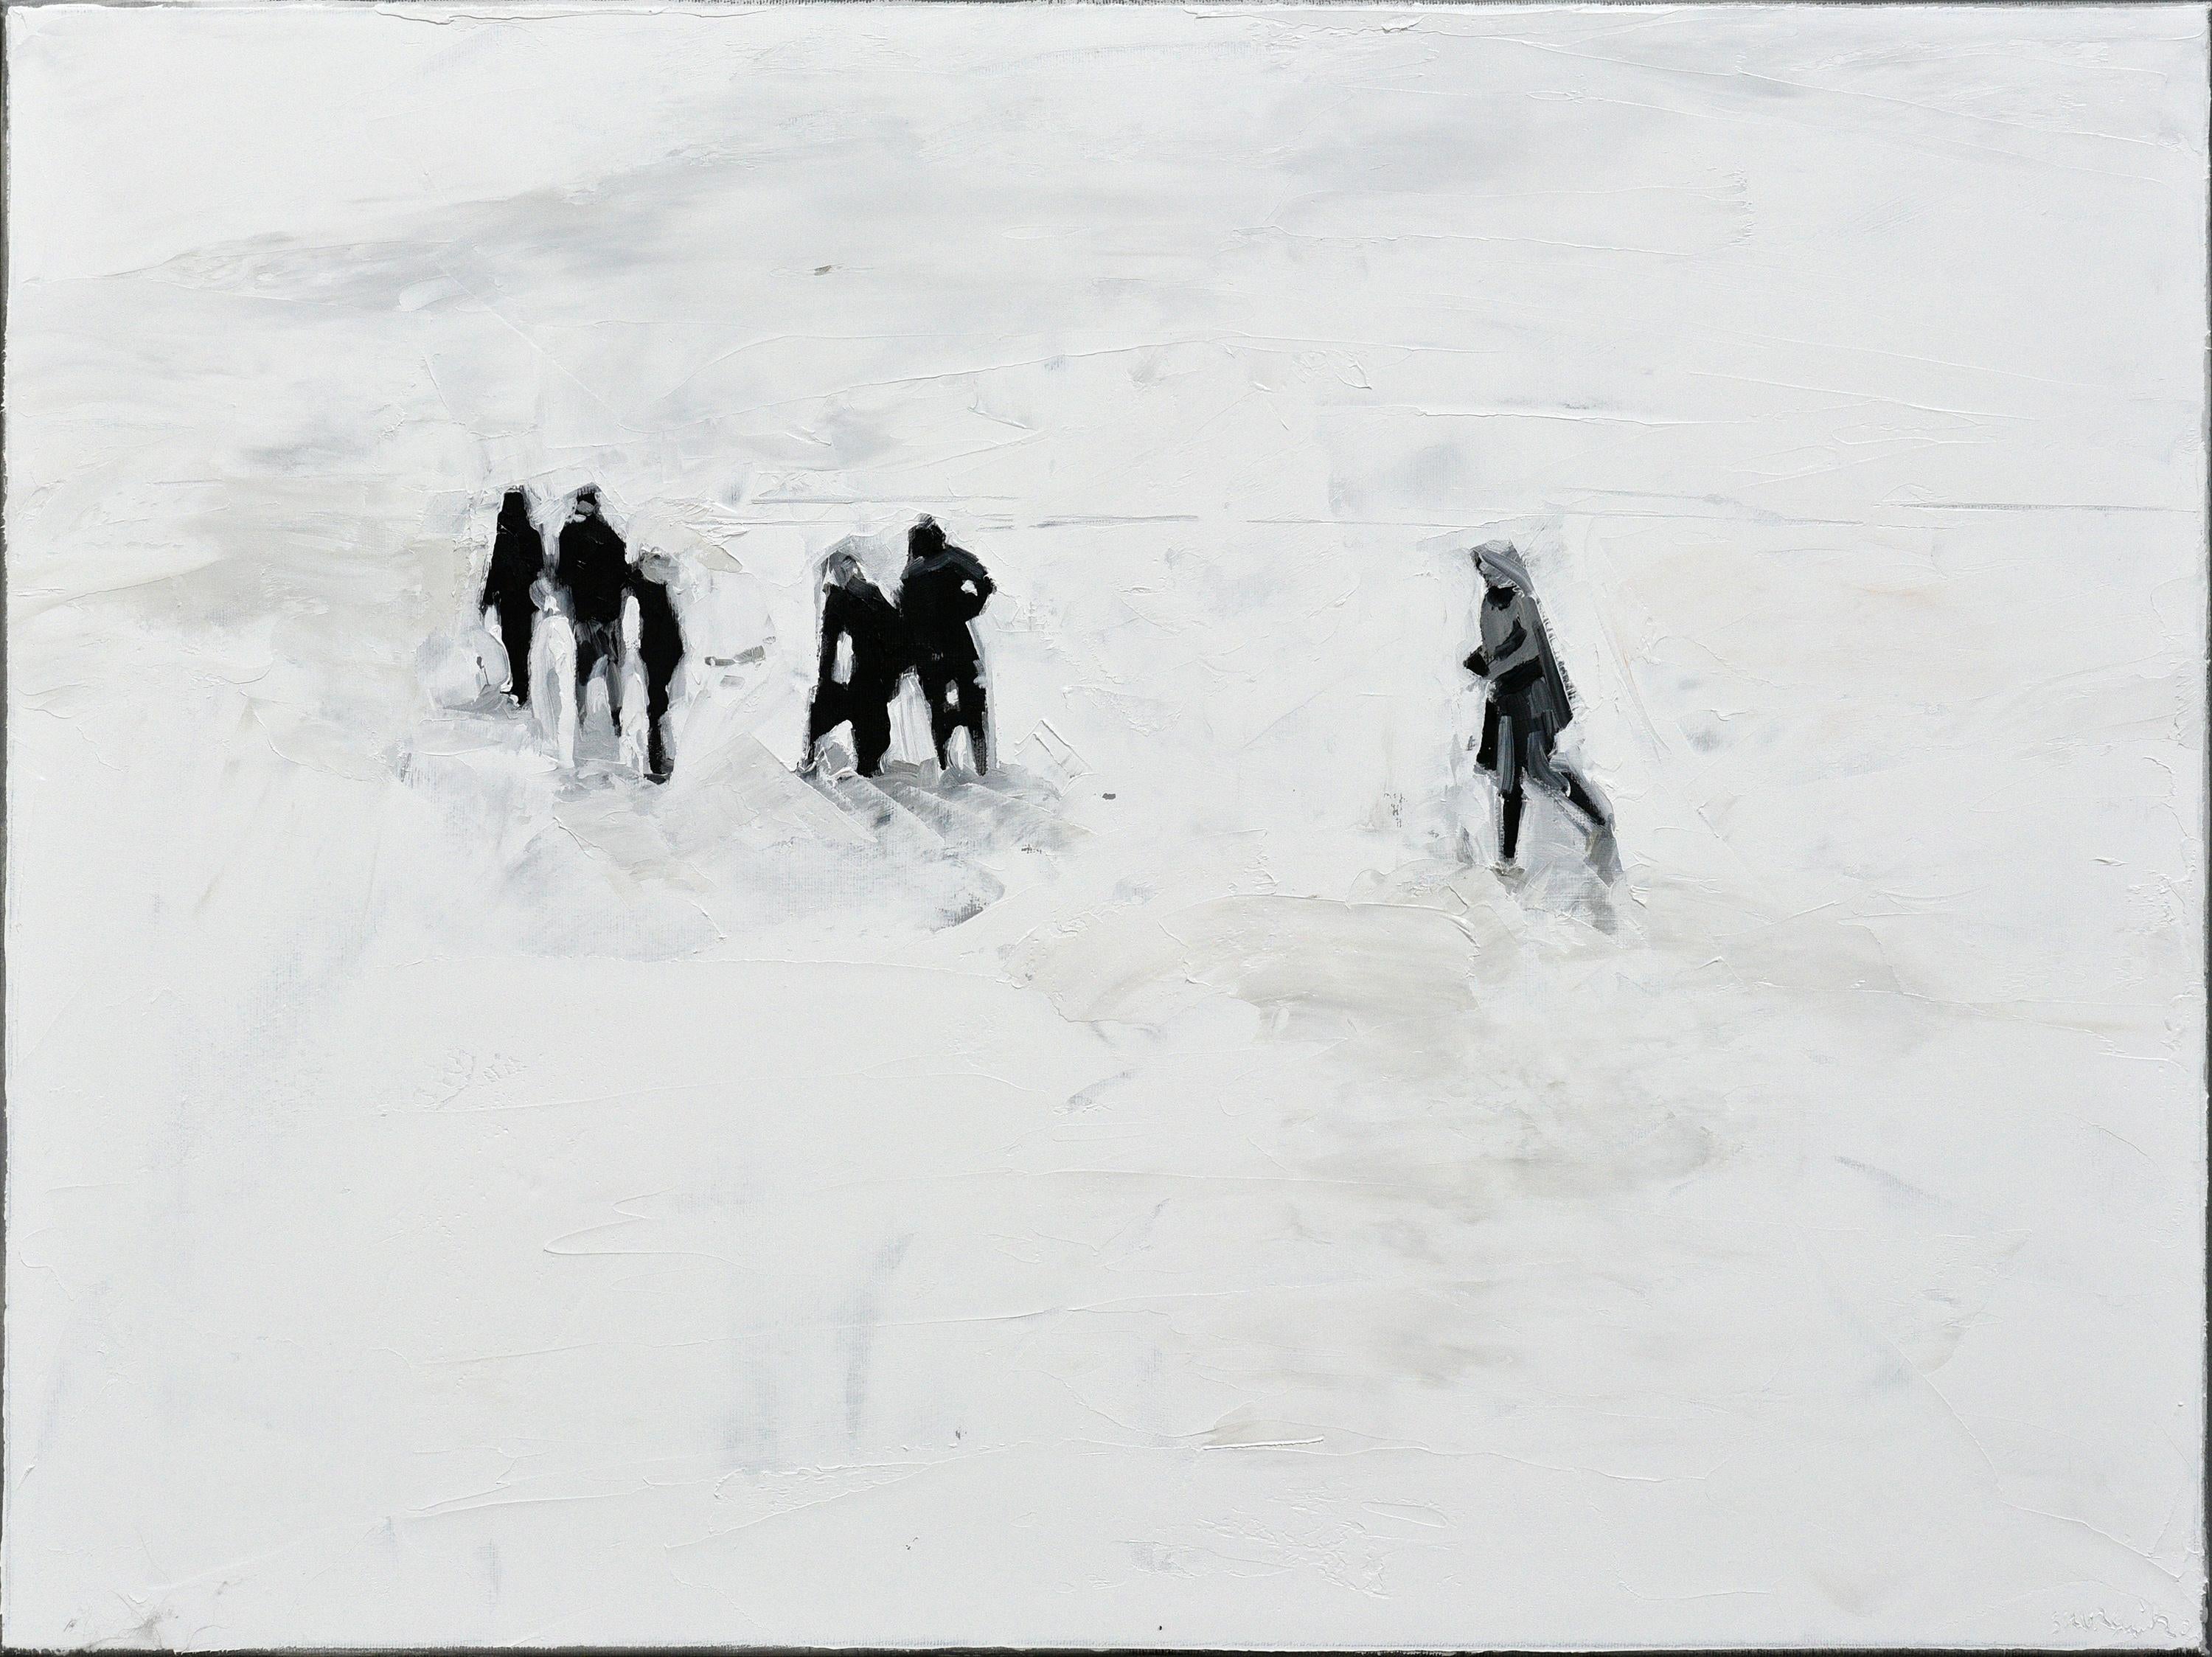 Fußspuren
60 x 80 cm
oil on canvas 
2020

A wide, apparently endless plain forms the background of the events: out of nowhere, dark figures enter the scenery, as if coming from the depths of the canvas, appearing through layers of bright, shiny